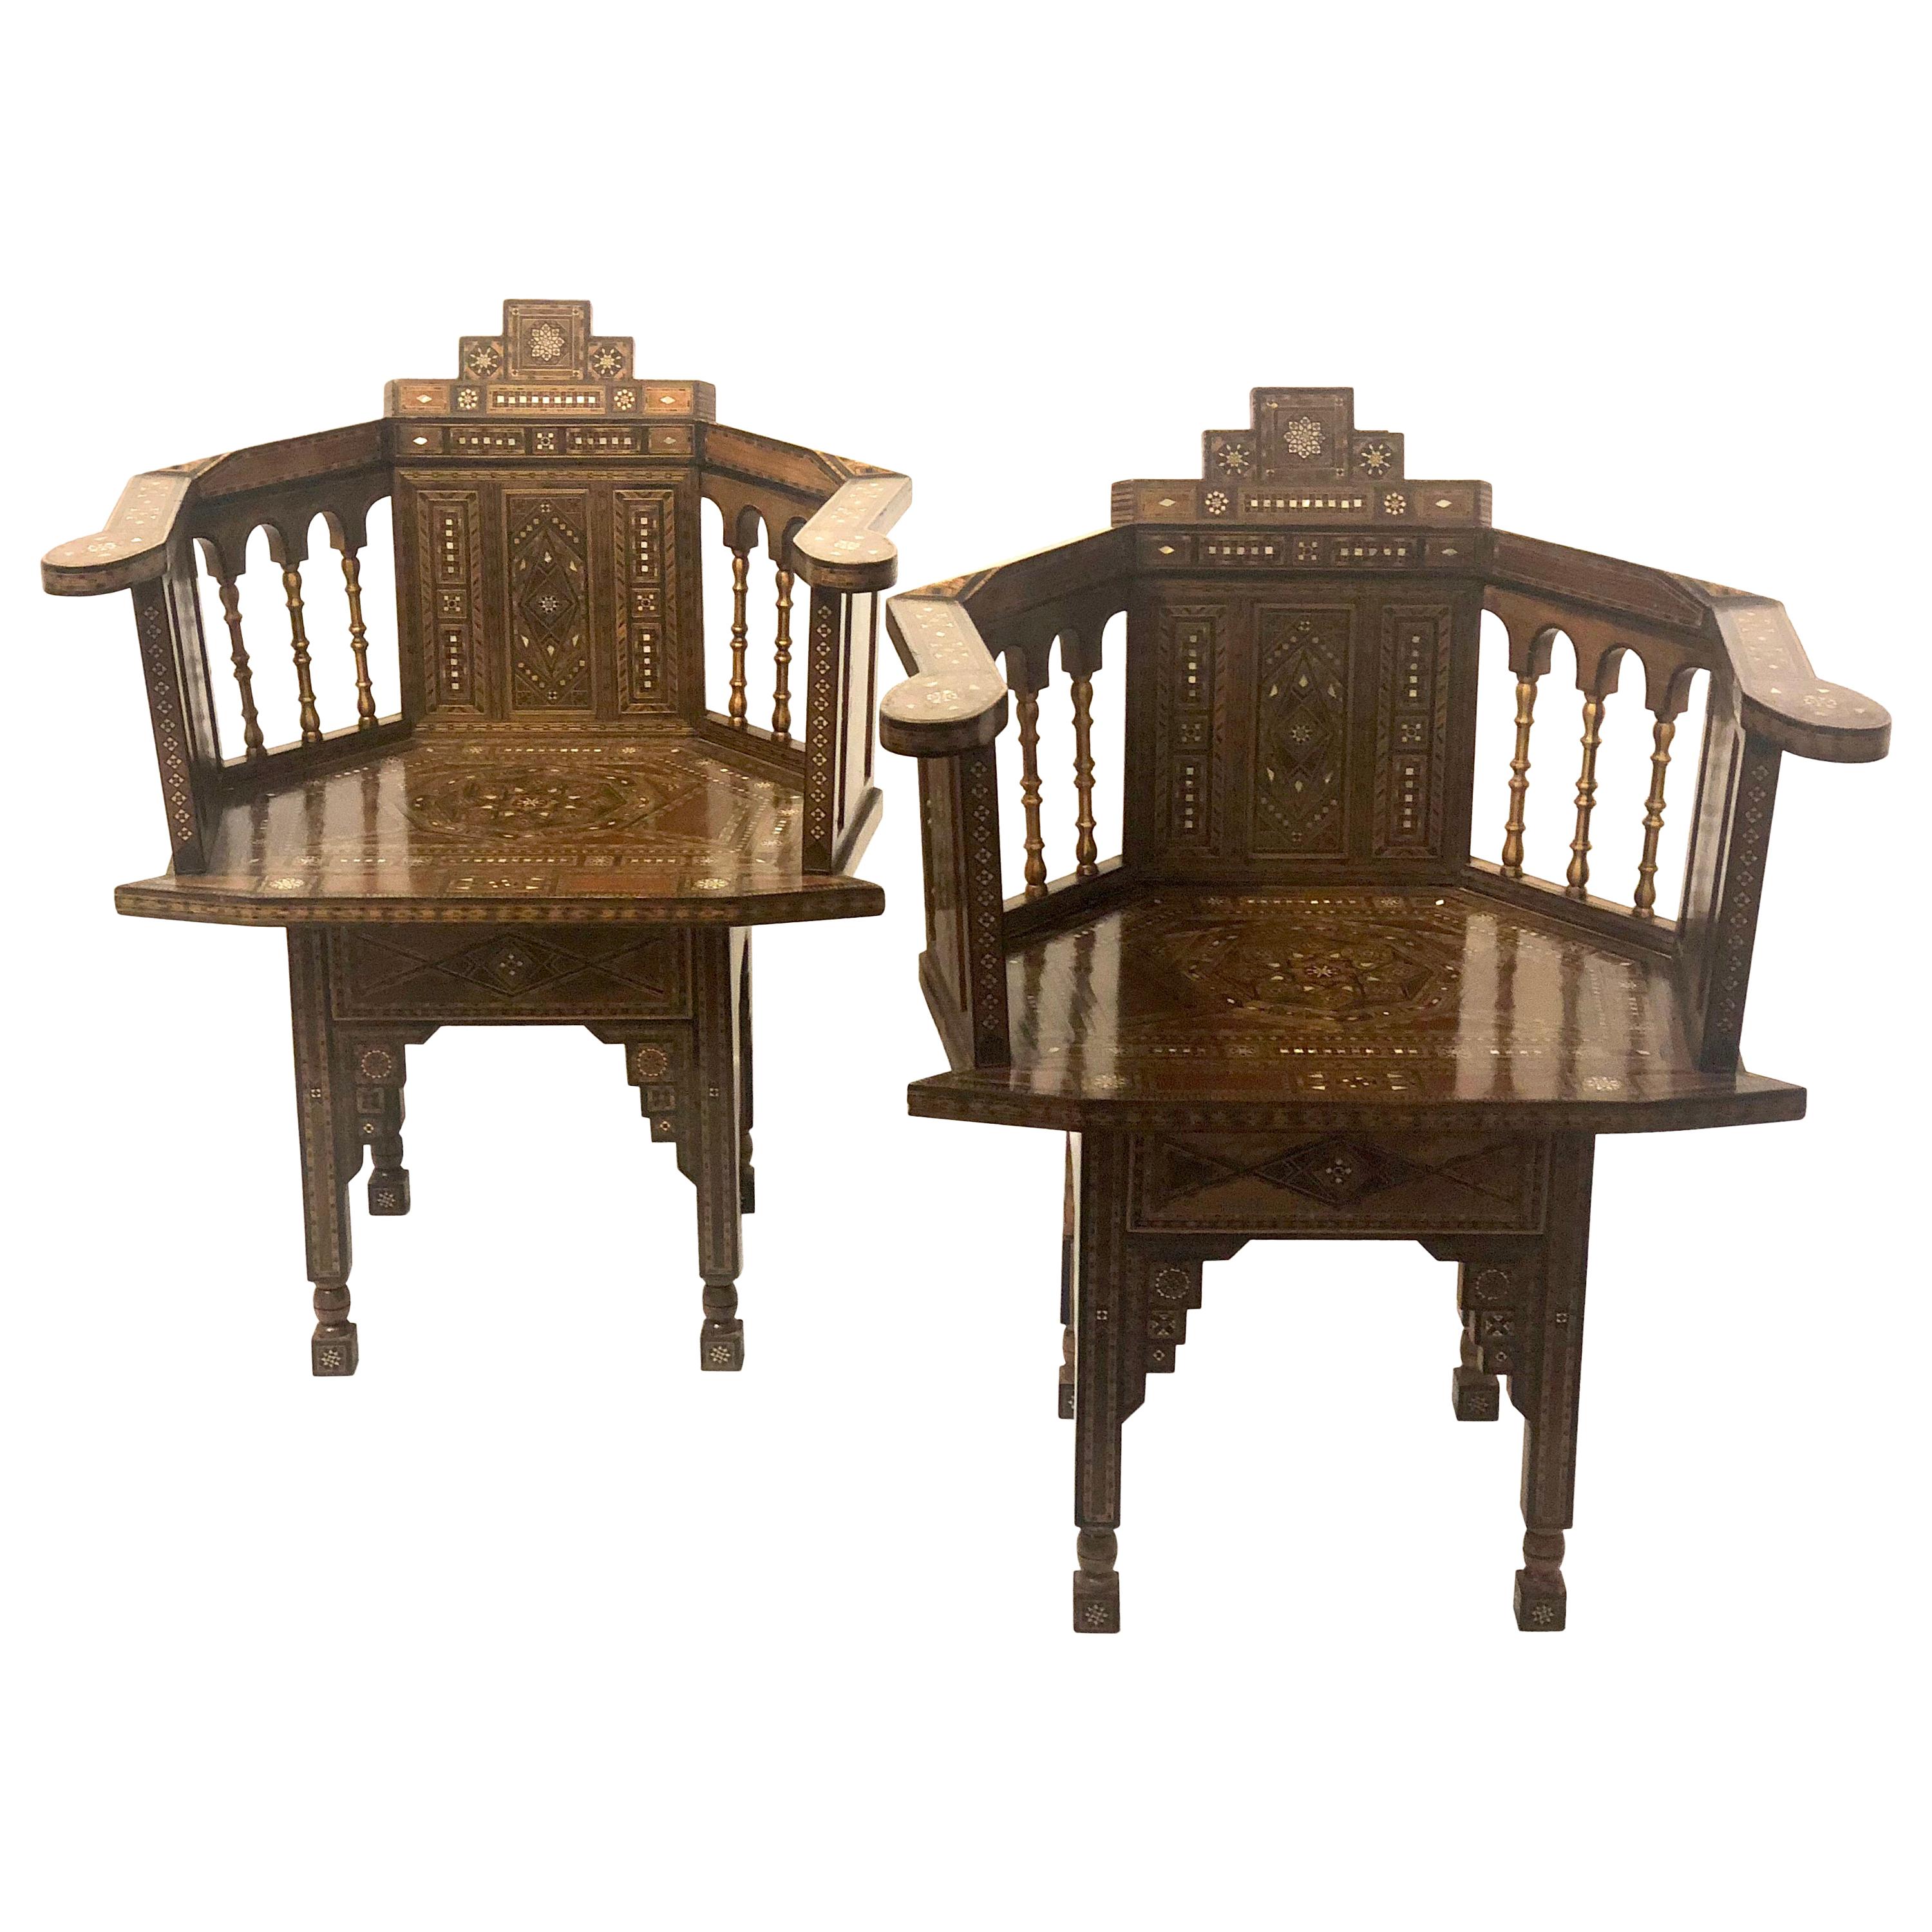 Pair of Antique Moroccan or Syrian Barrel Back Armchairs